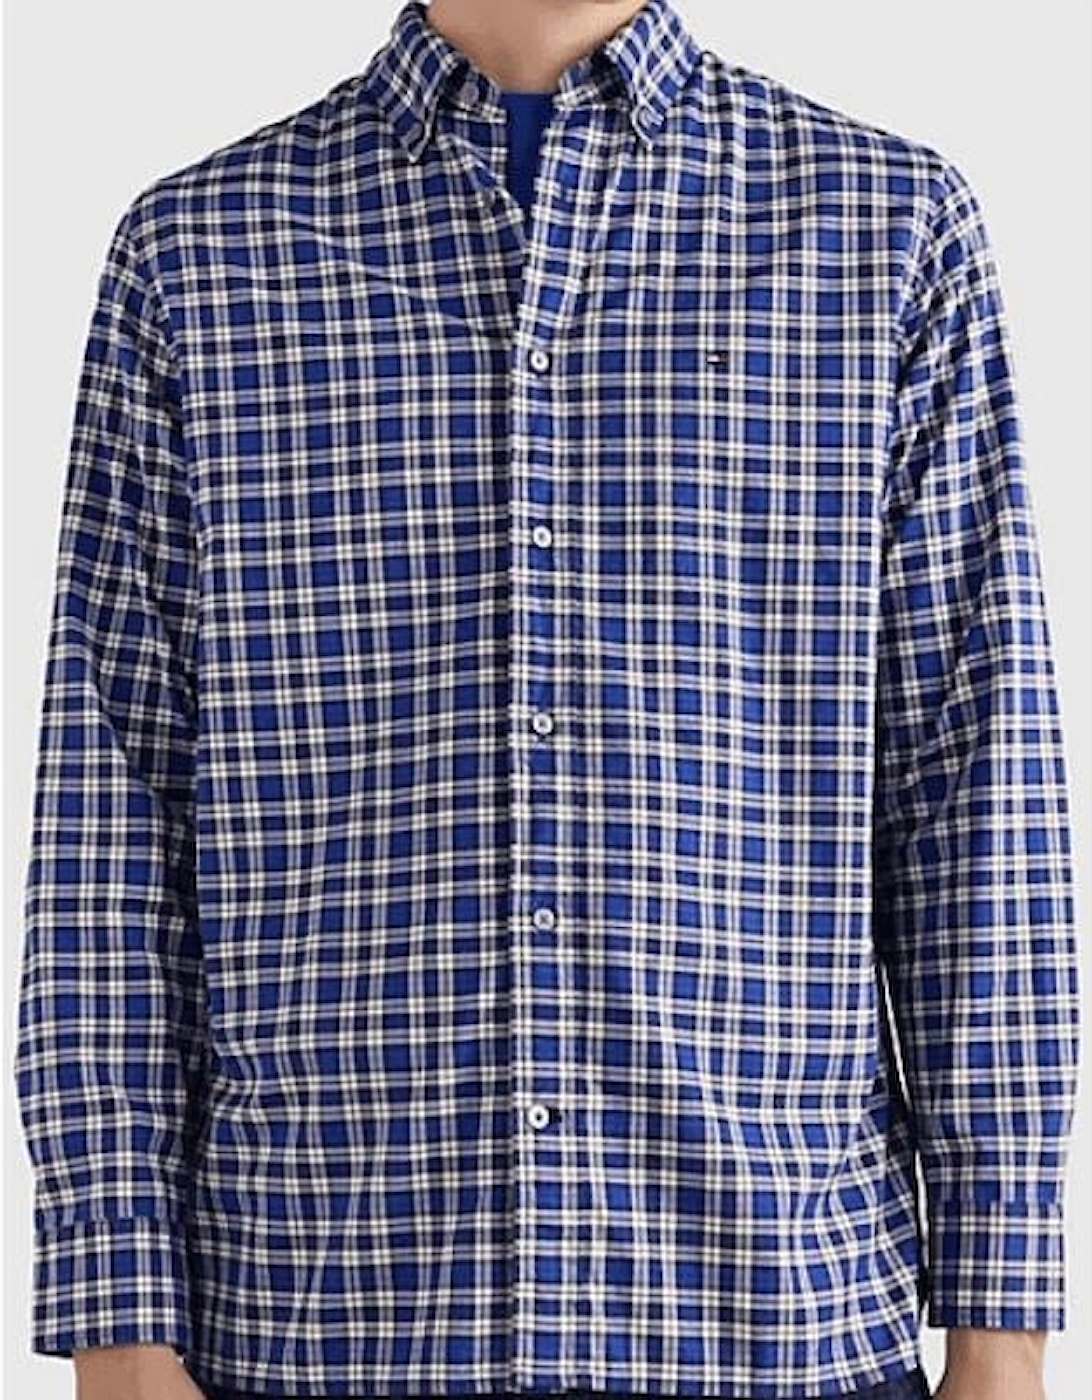 Embroidered Logo Button Up Check Blue Shirt